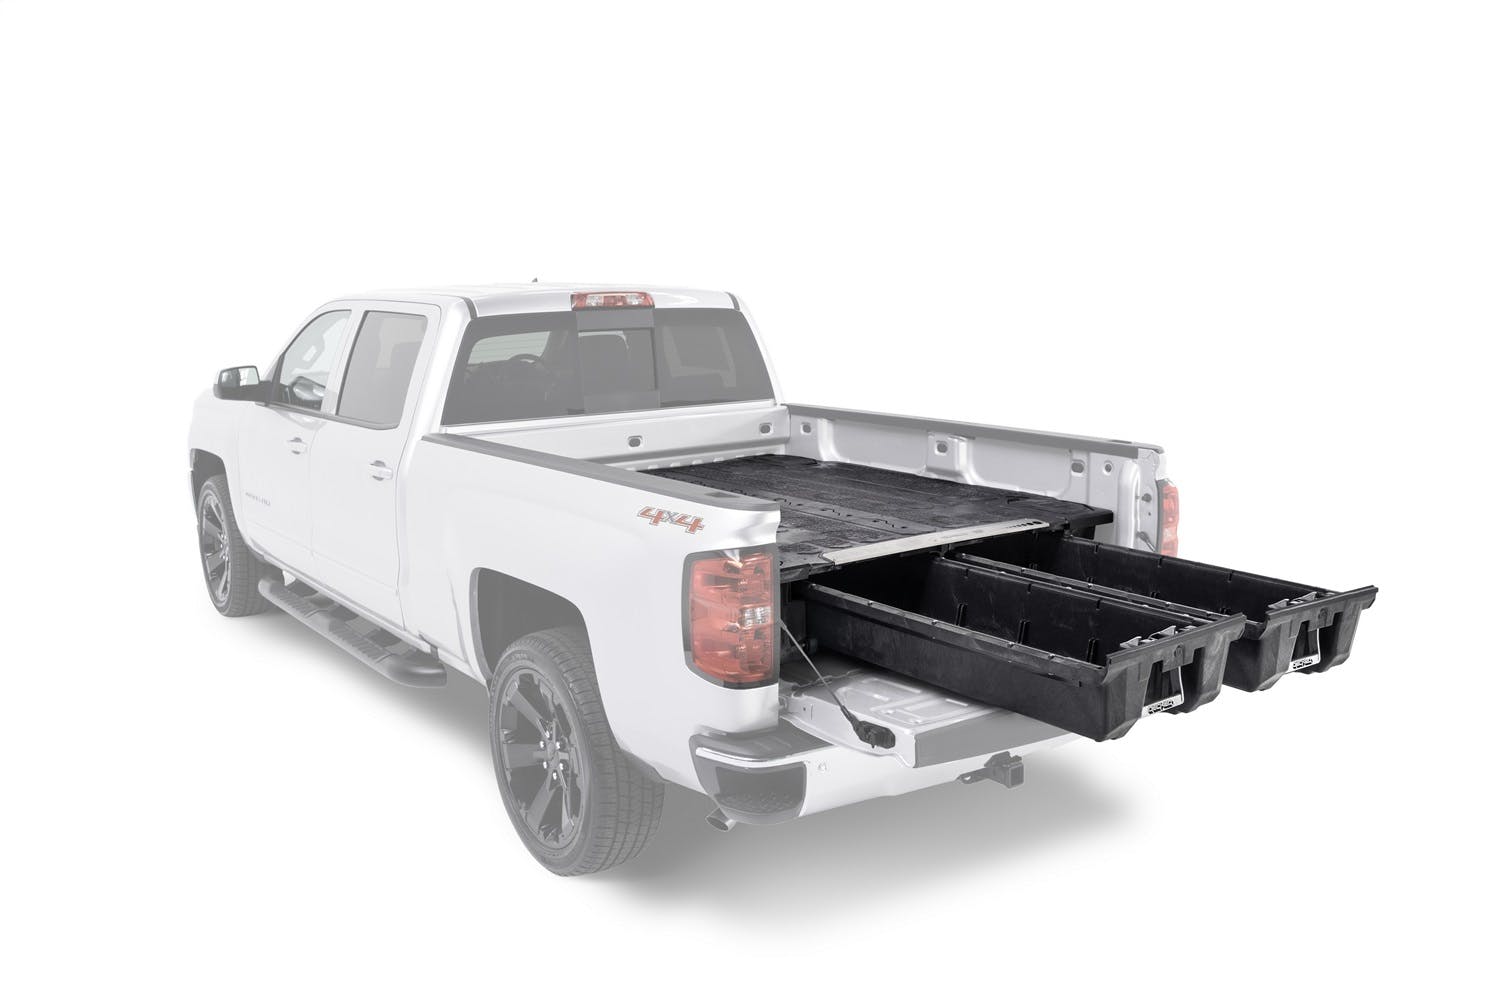 DECKED DF4 64.54 Two Drawer Storage System for A Full Size Pick Up Truck